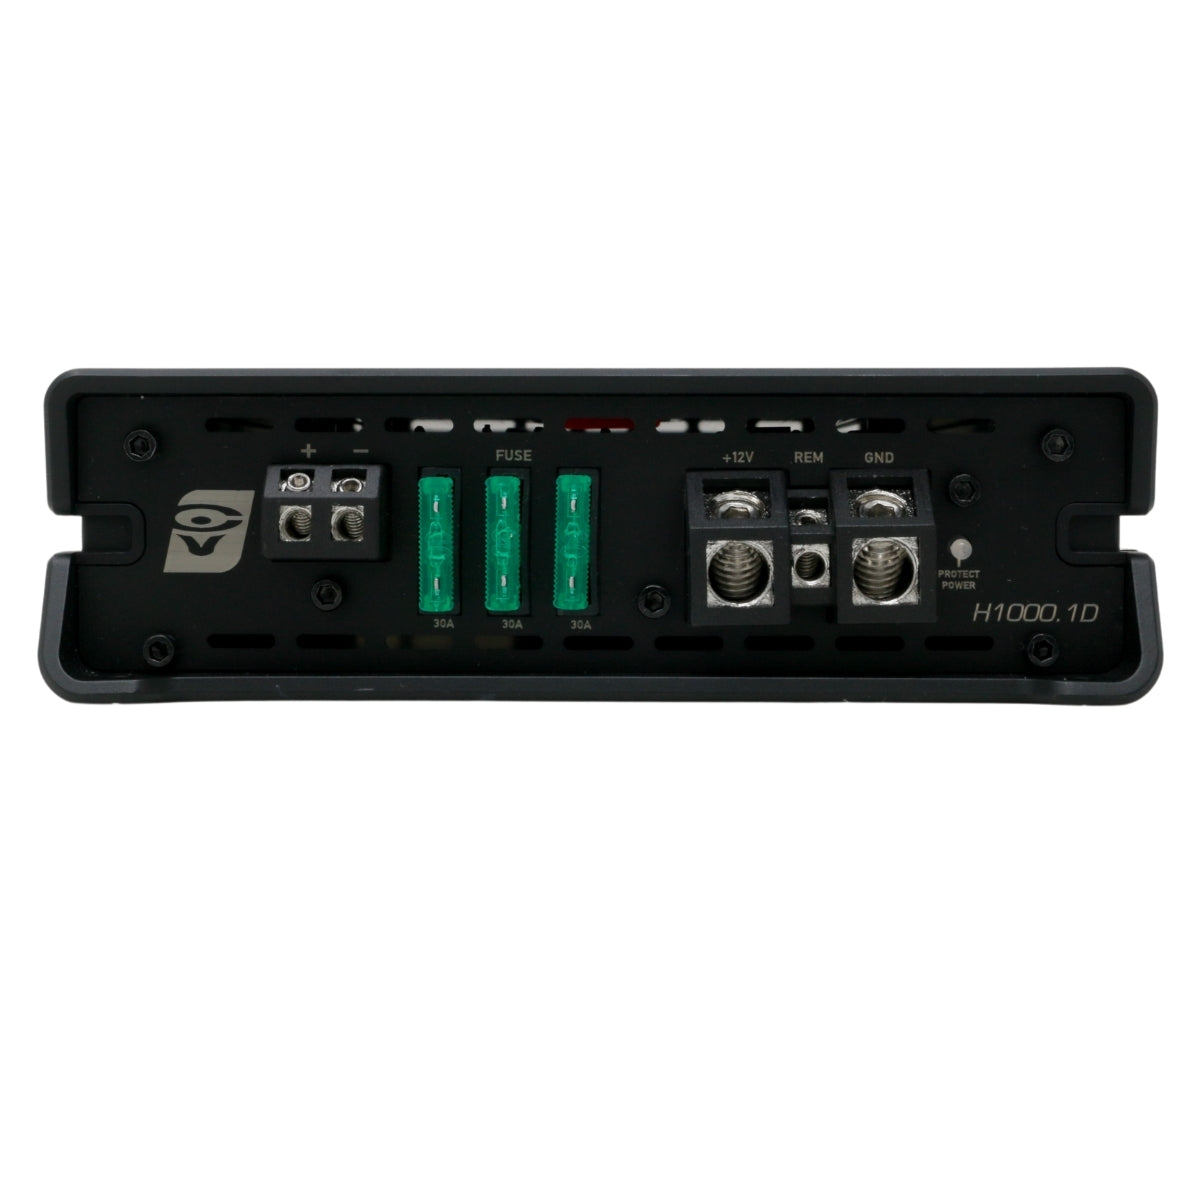 A black, Cerwin Vega Inc. HED 1000W RMS Class-D Mono Digital Amplifier with various connectors and terminals on one side. It features three green fuses labeled 35A, 35A, and 20A. Terminals are designated for +12V, REM, and GND alongside other input/output ports. The model number "H1000.1D" is printed in white near the bottom right.
